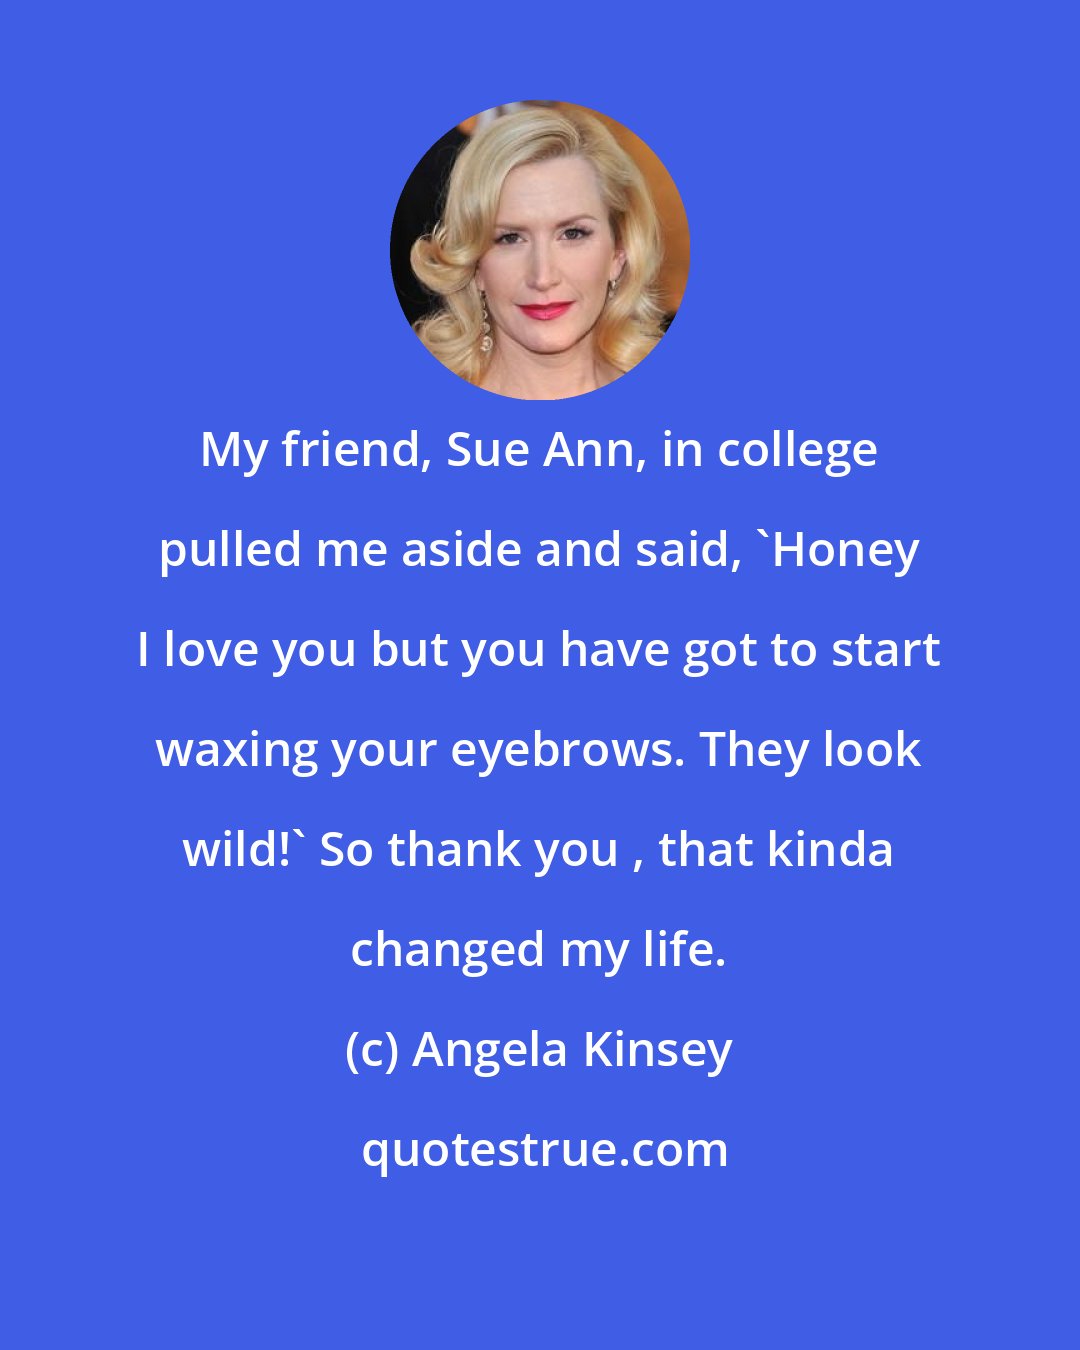 Angela Kinsey: My friend, Sue Ann, in college pulled me aside and said, 'Honey I love you but you have got to start waxing your eyebrows. They look wild!' So thank you , that kinda changed my life.